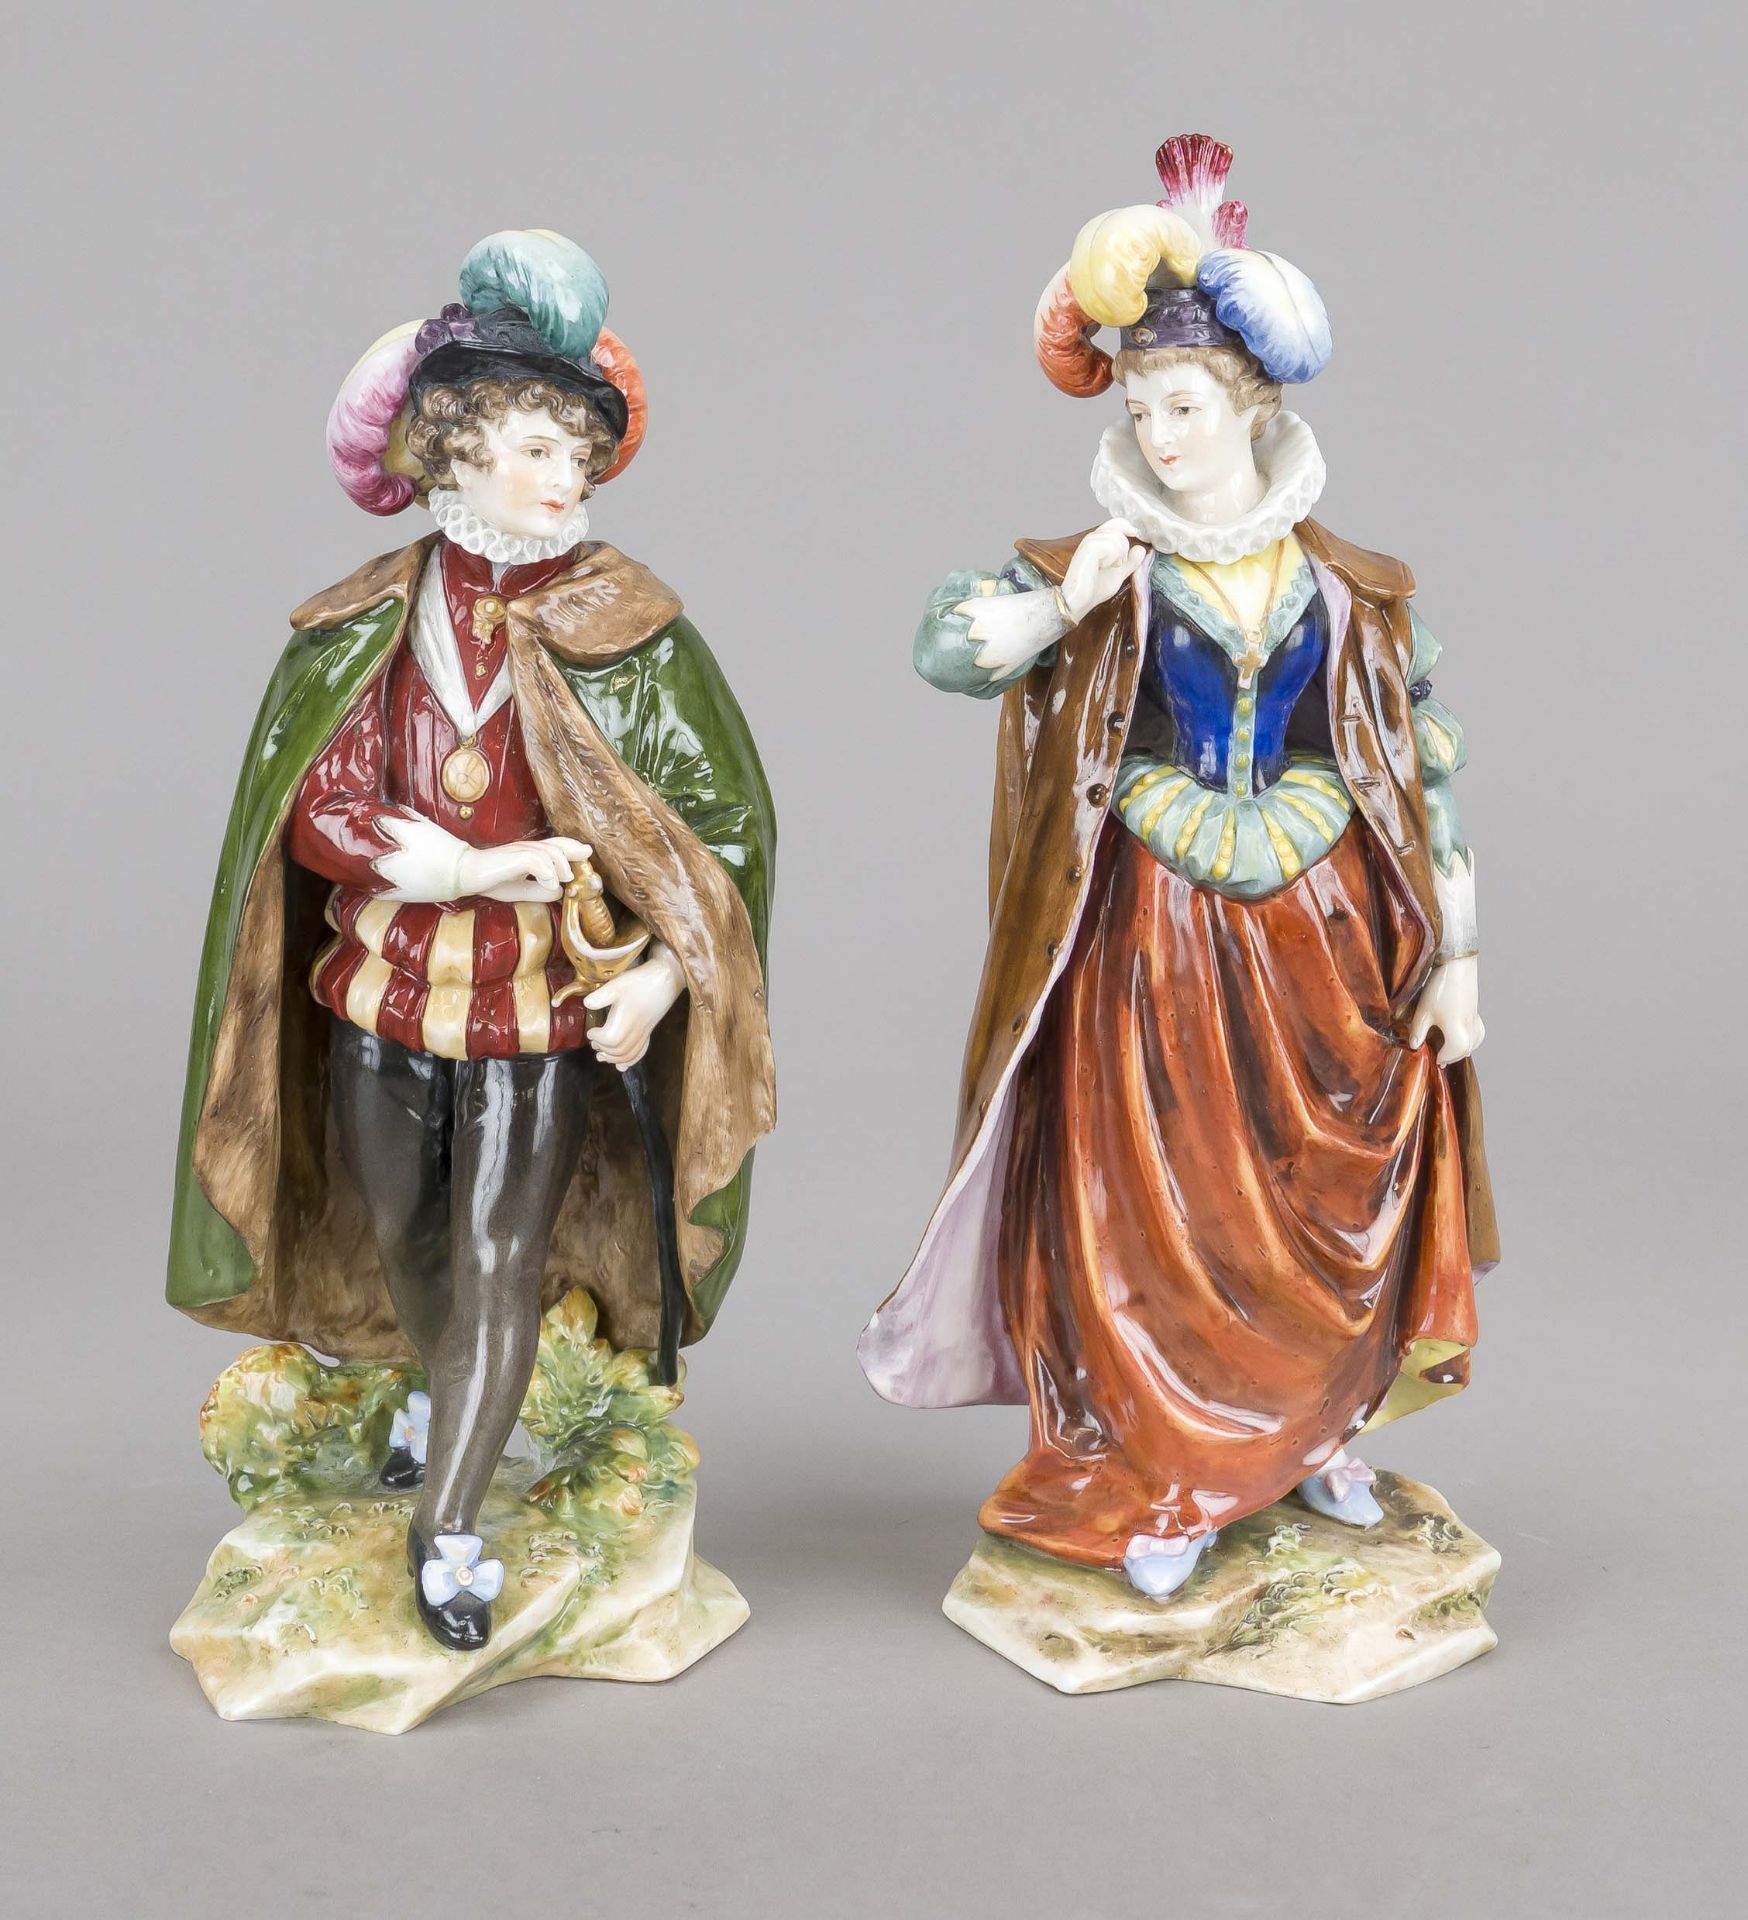 Noble couple, Rudolstadt, Volkstedt, Thuringia, 20th century, nobleman with sword and lady with